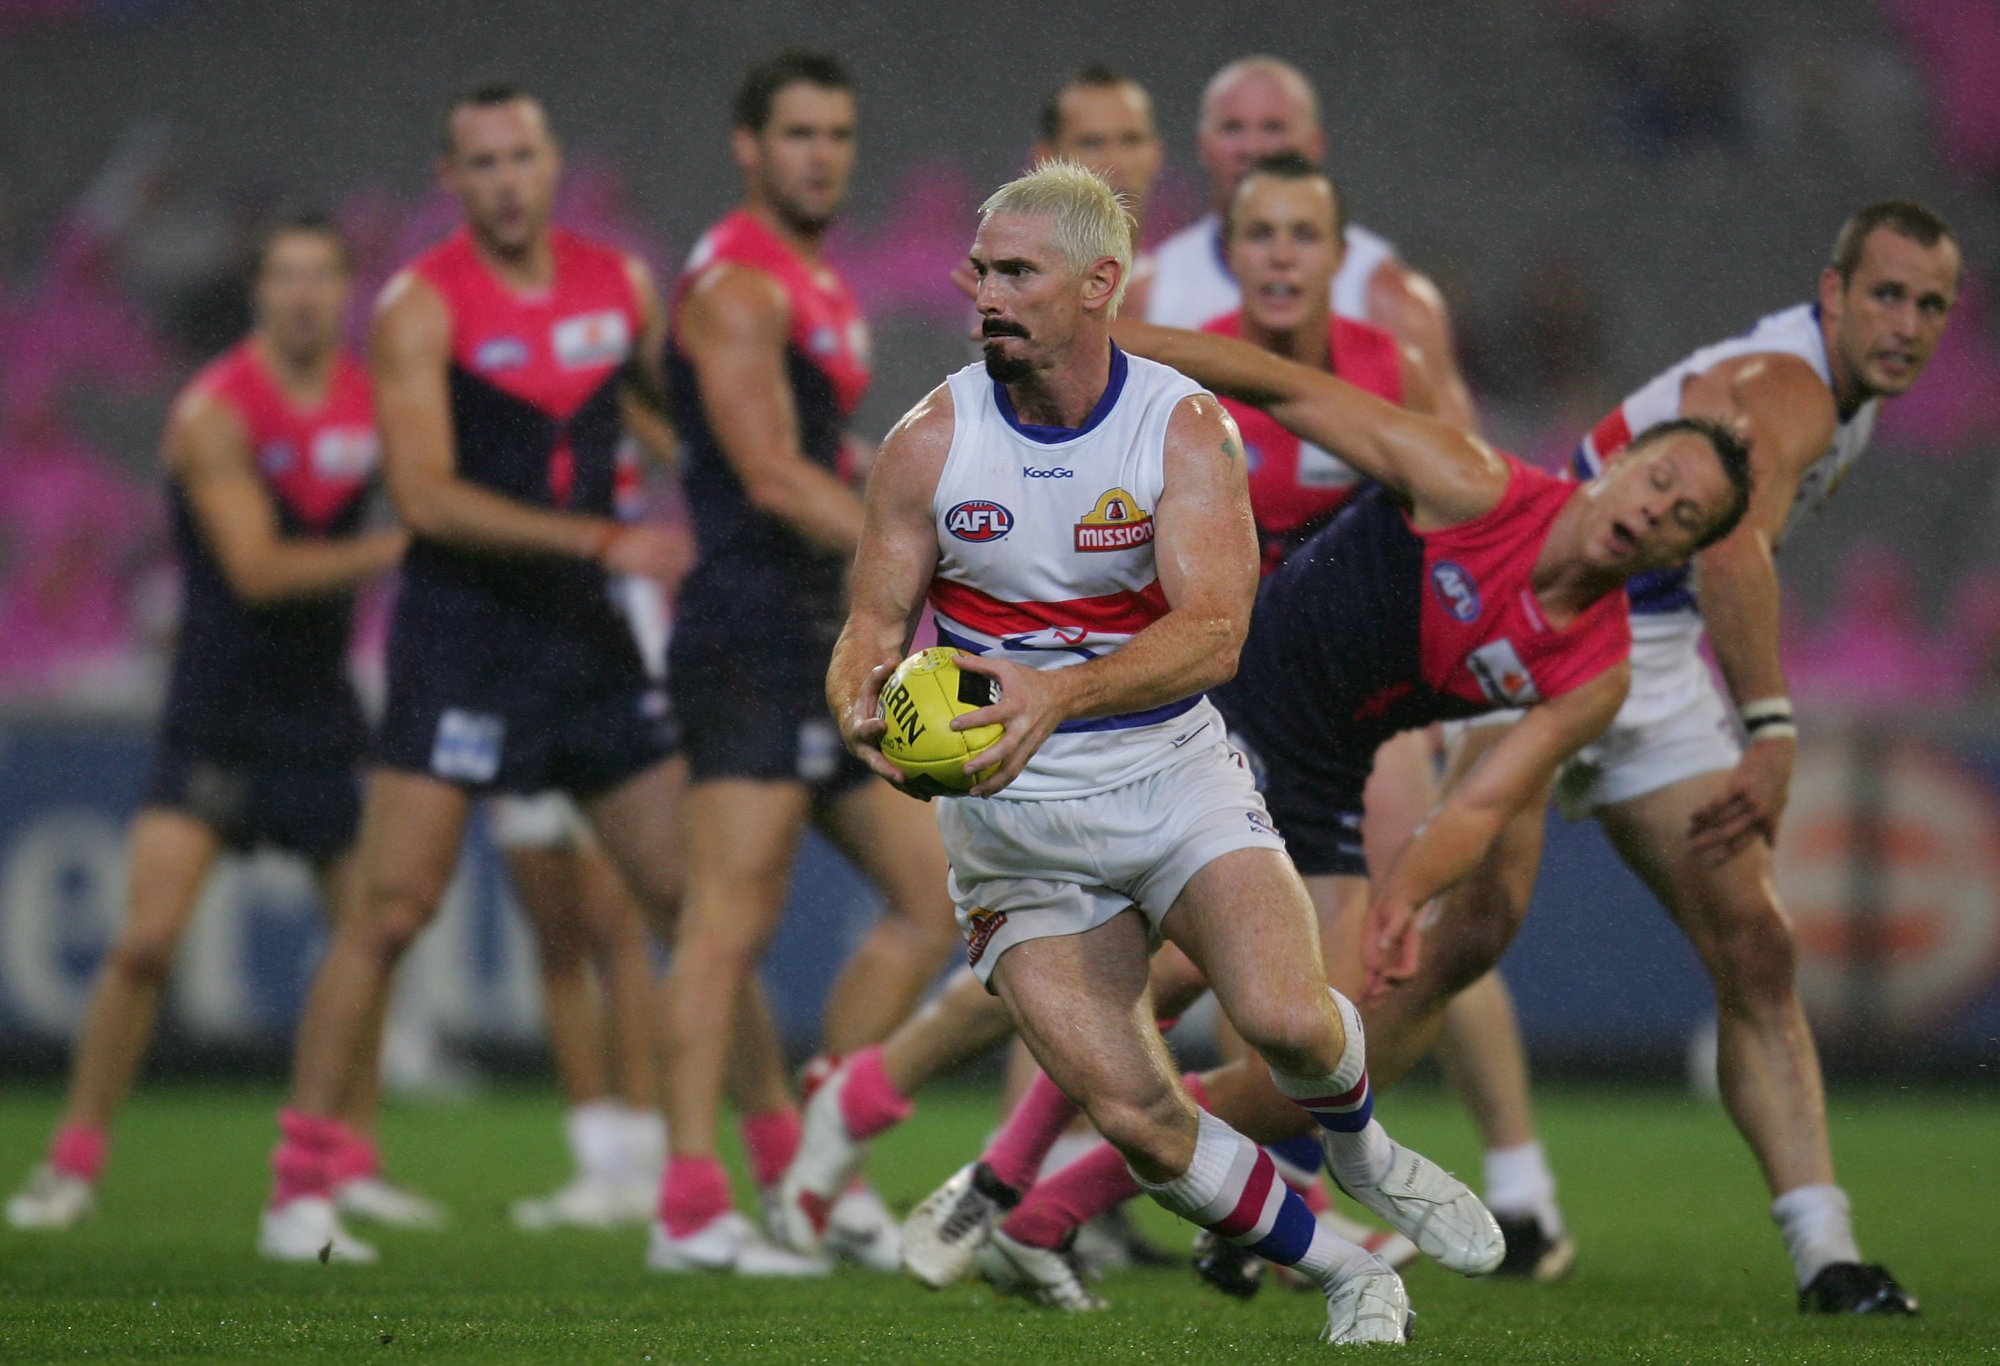 Jason Akermanis in action for the Western Bulldogs in 2010.